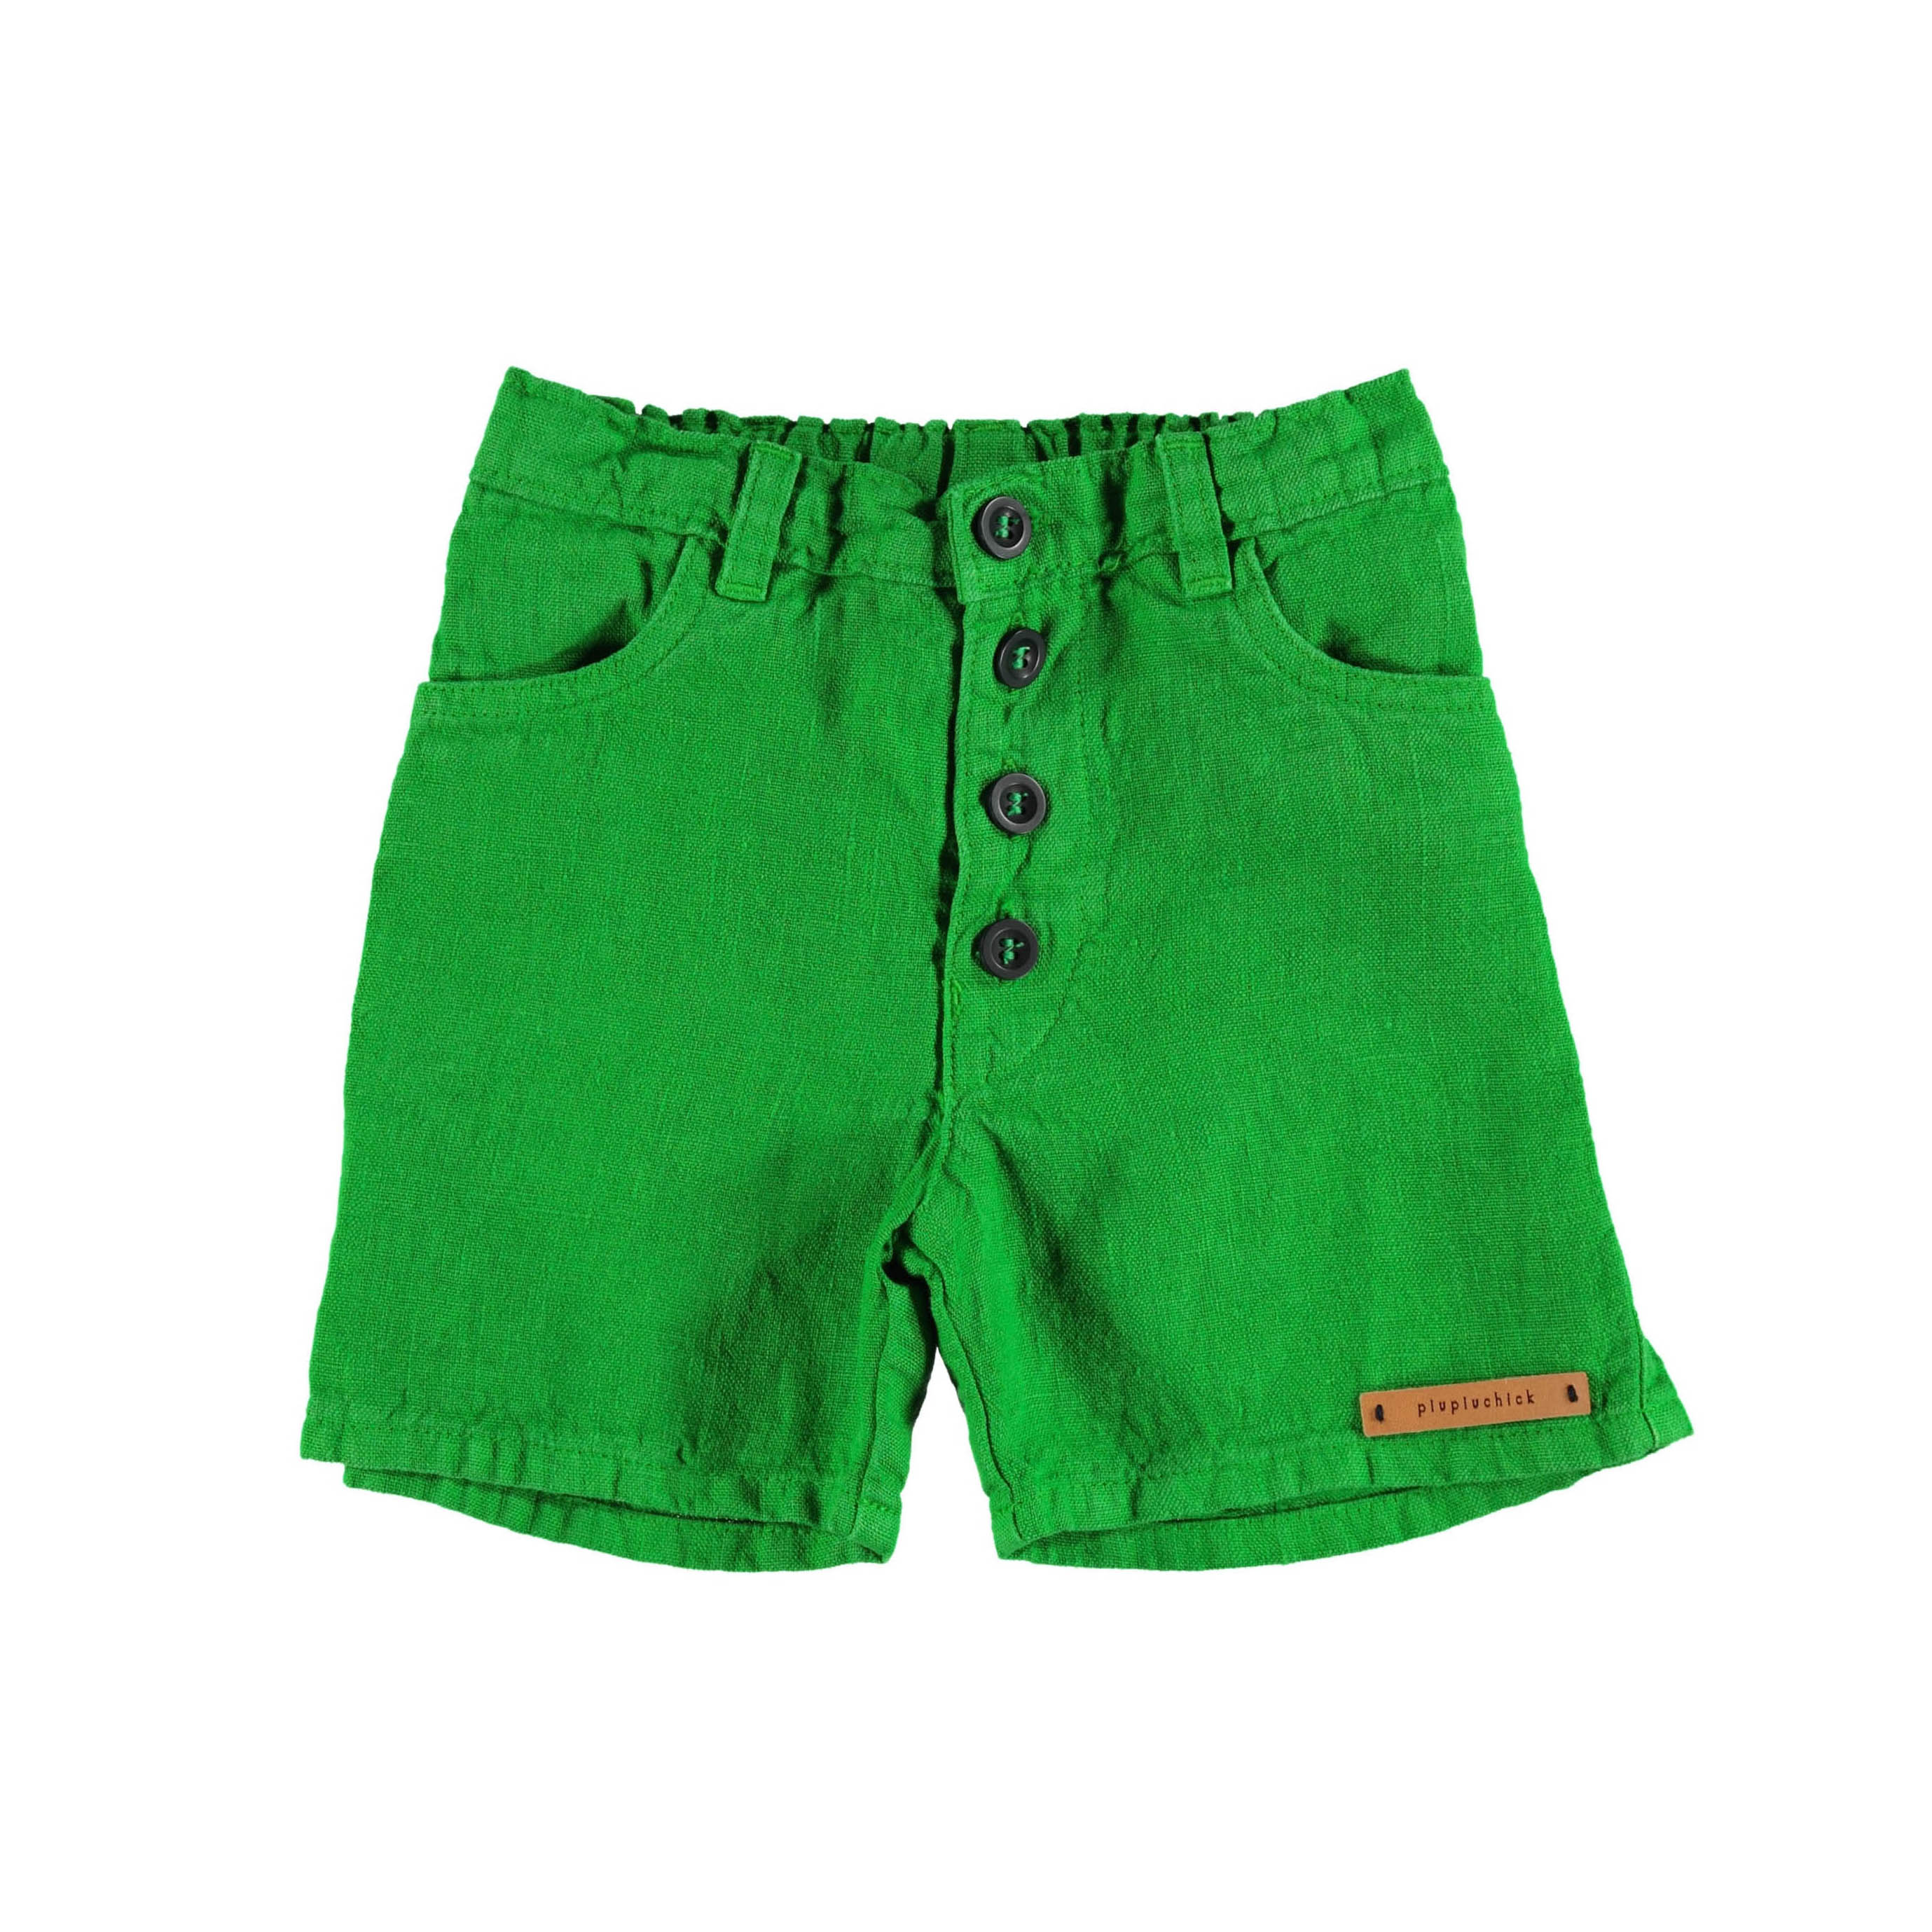 piuwrlz Shorts for Children's Boys Girls Solid Color Single Piece Short  Trousers Green Size 6-7Years 